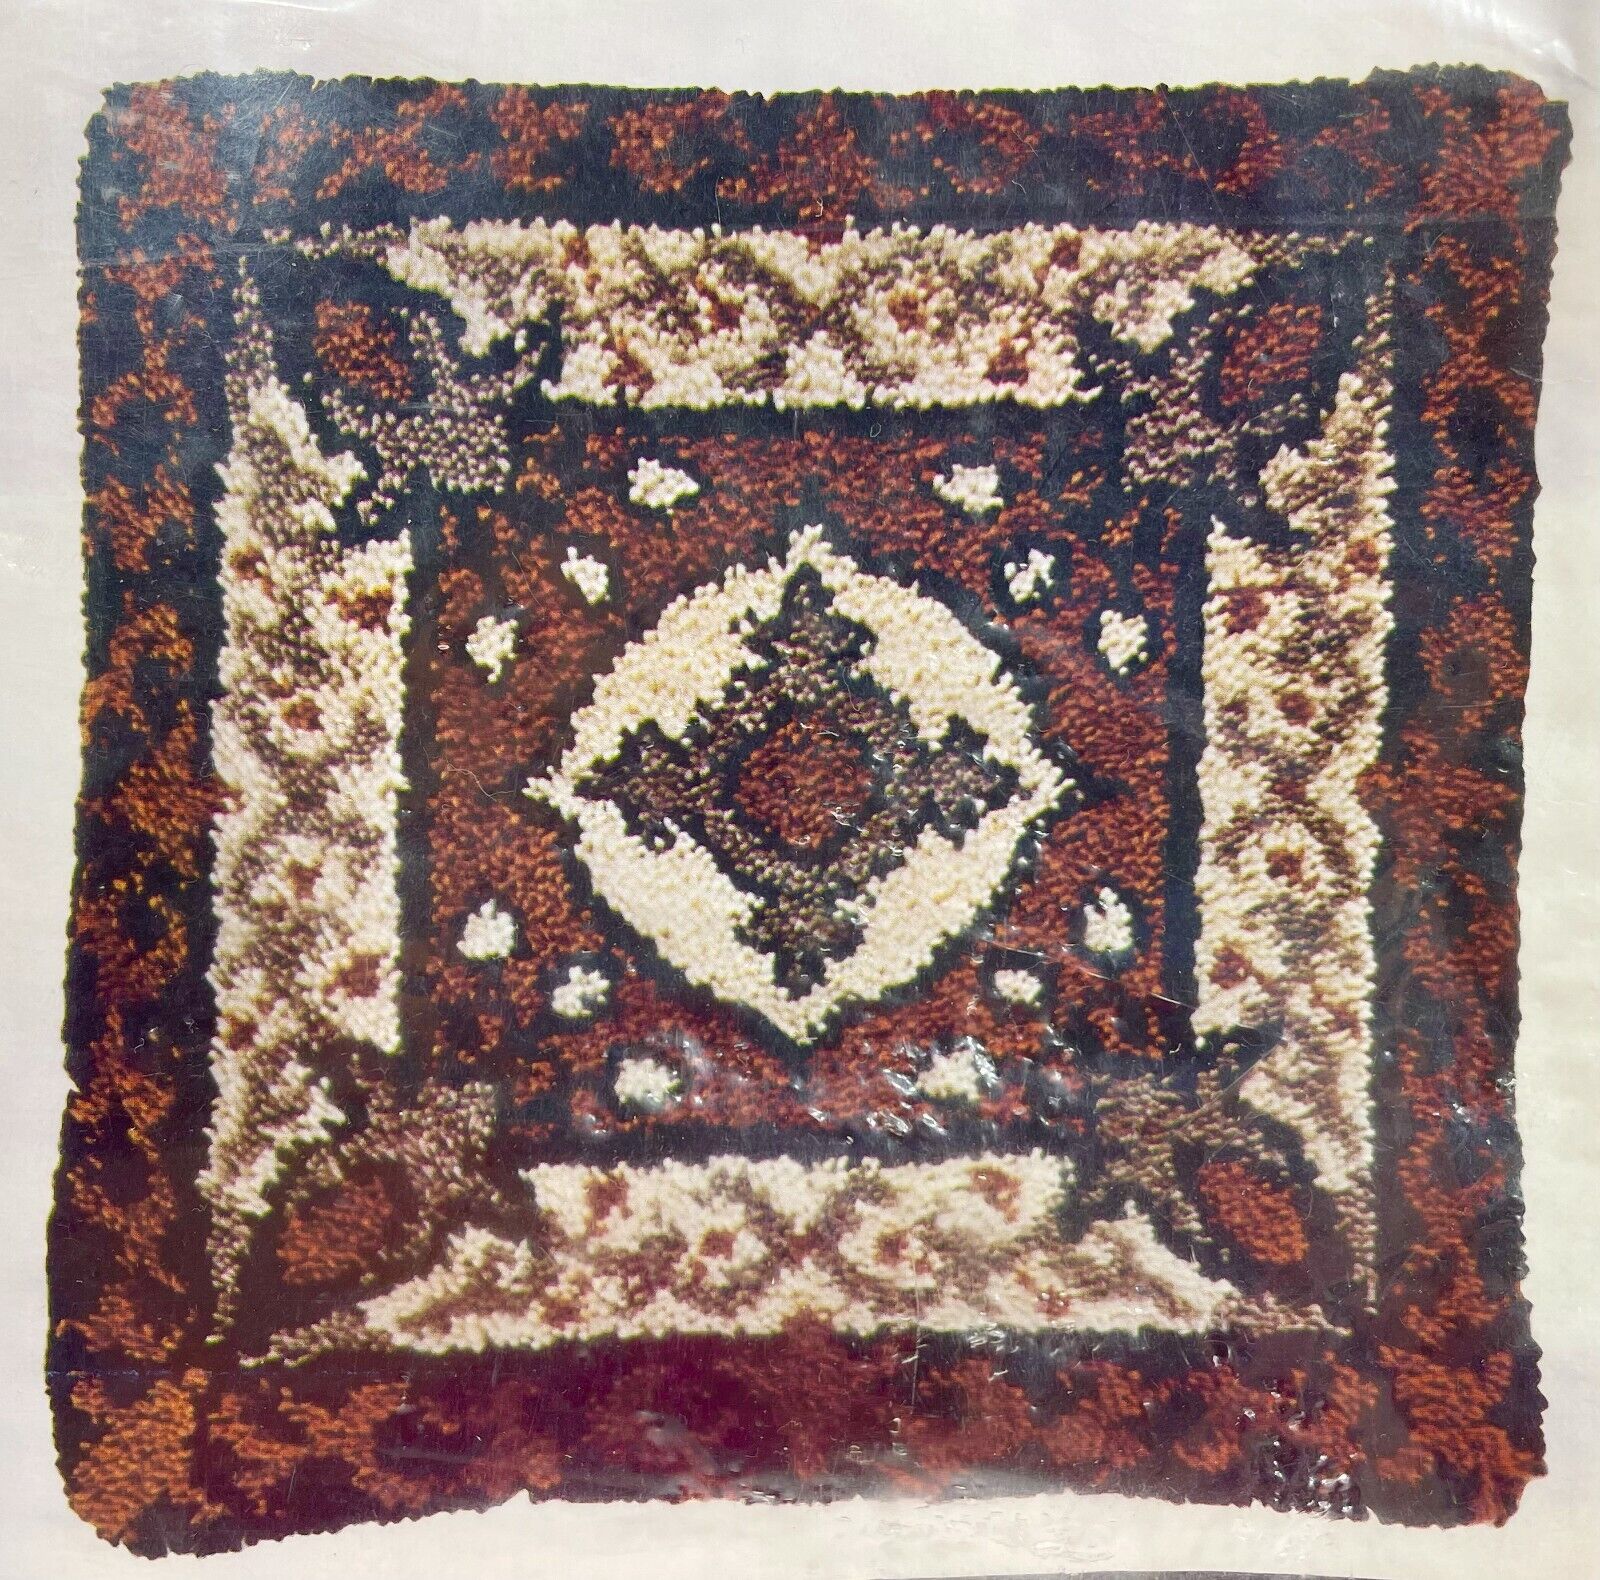 New 1977 Caron Latch Hook Canvas 3069 Persian Squares Pre-printed 27x27 10441